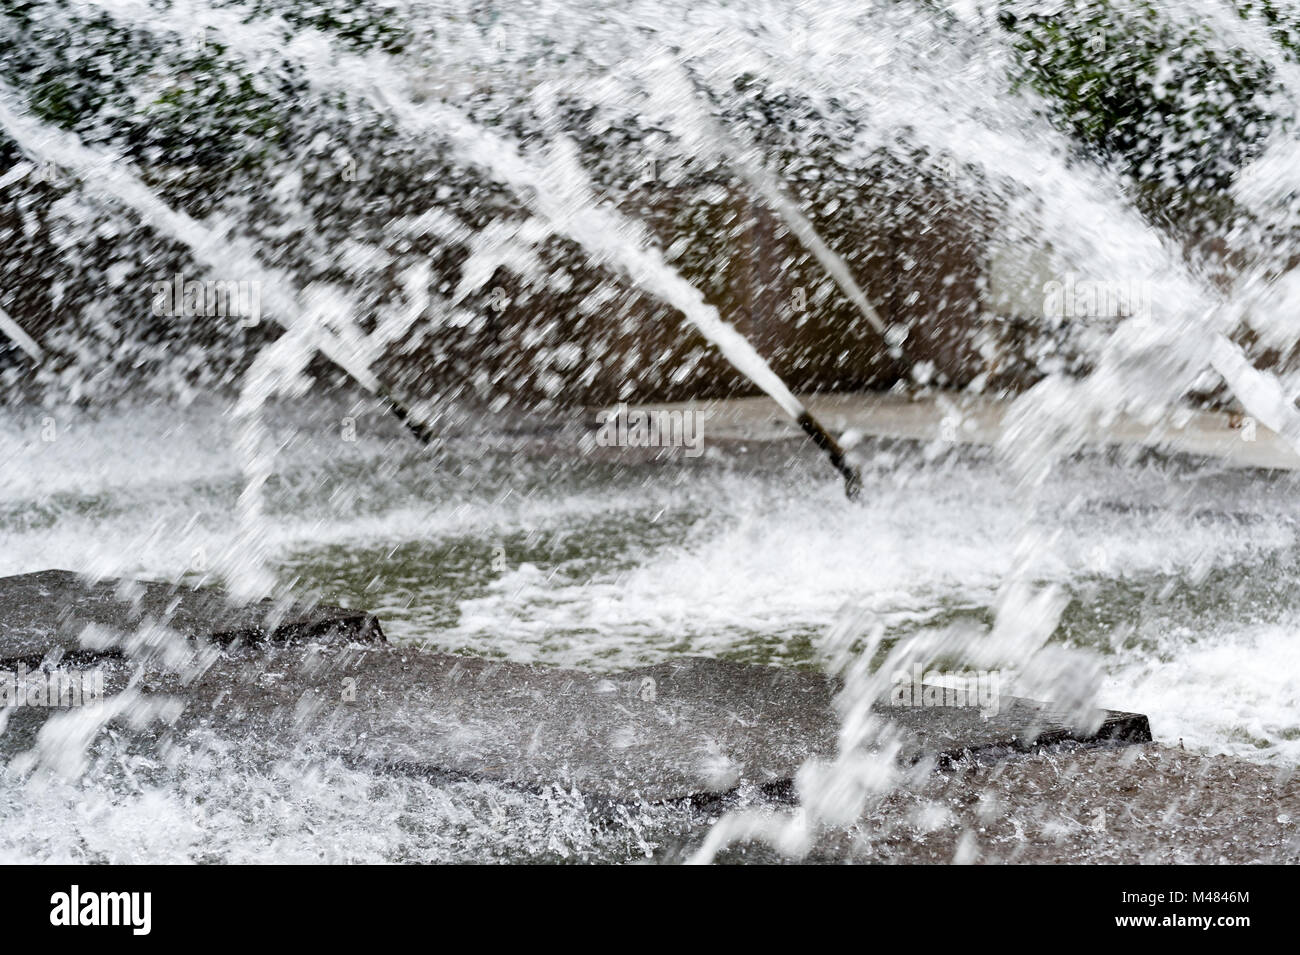 Waterspout fountain in the park Planten un Blomen in Hmaburg during daylight with blurred water. Stock Photo